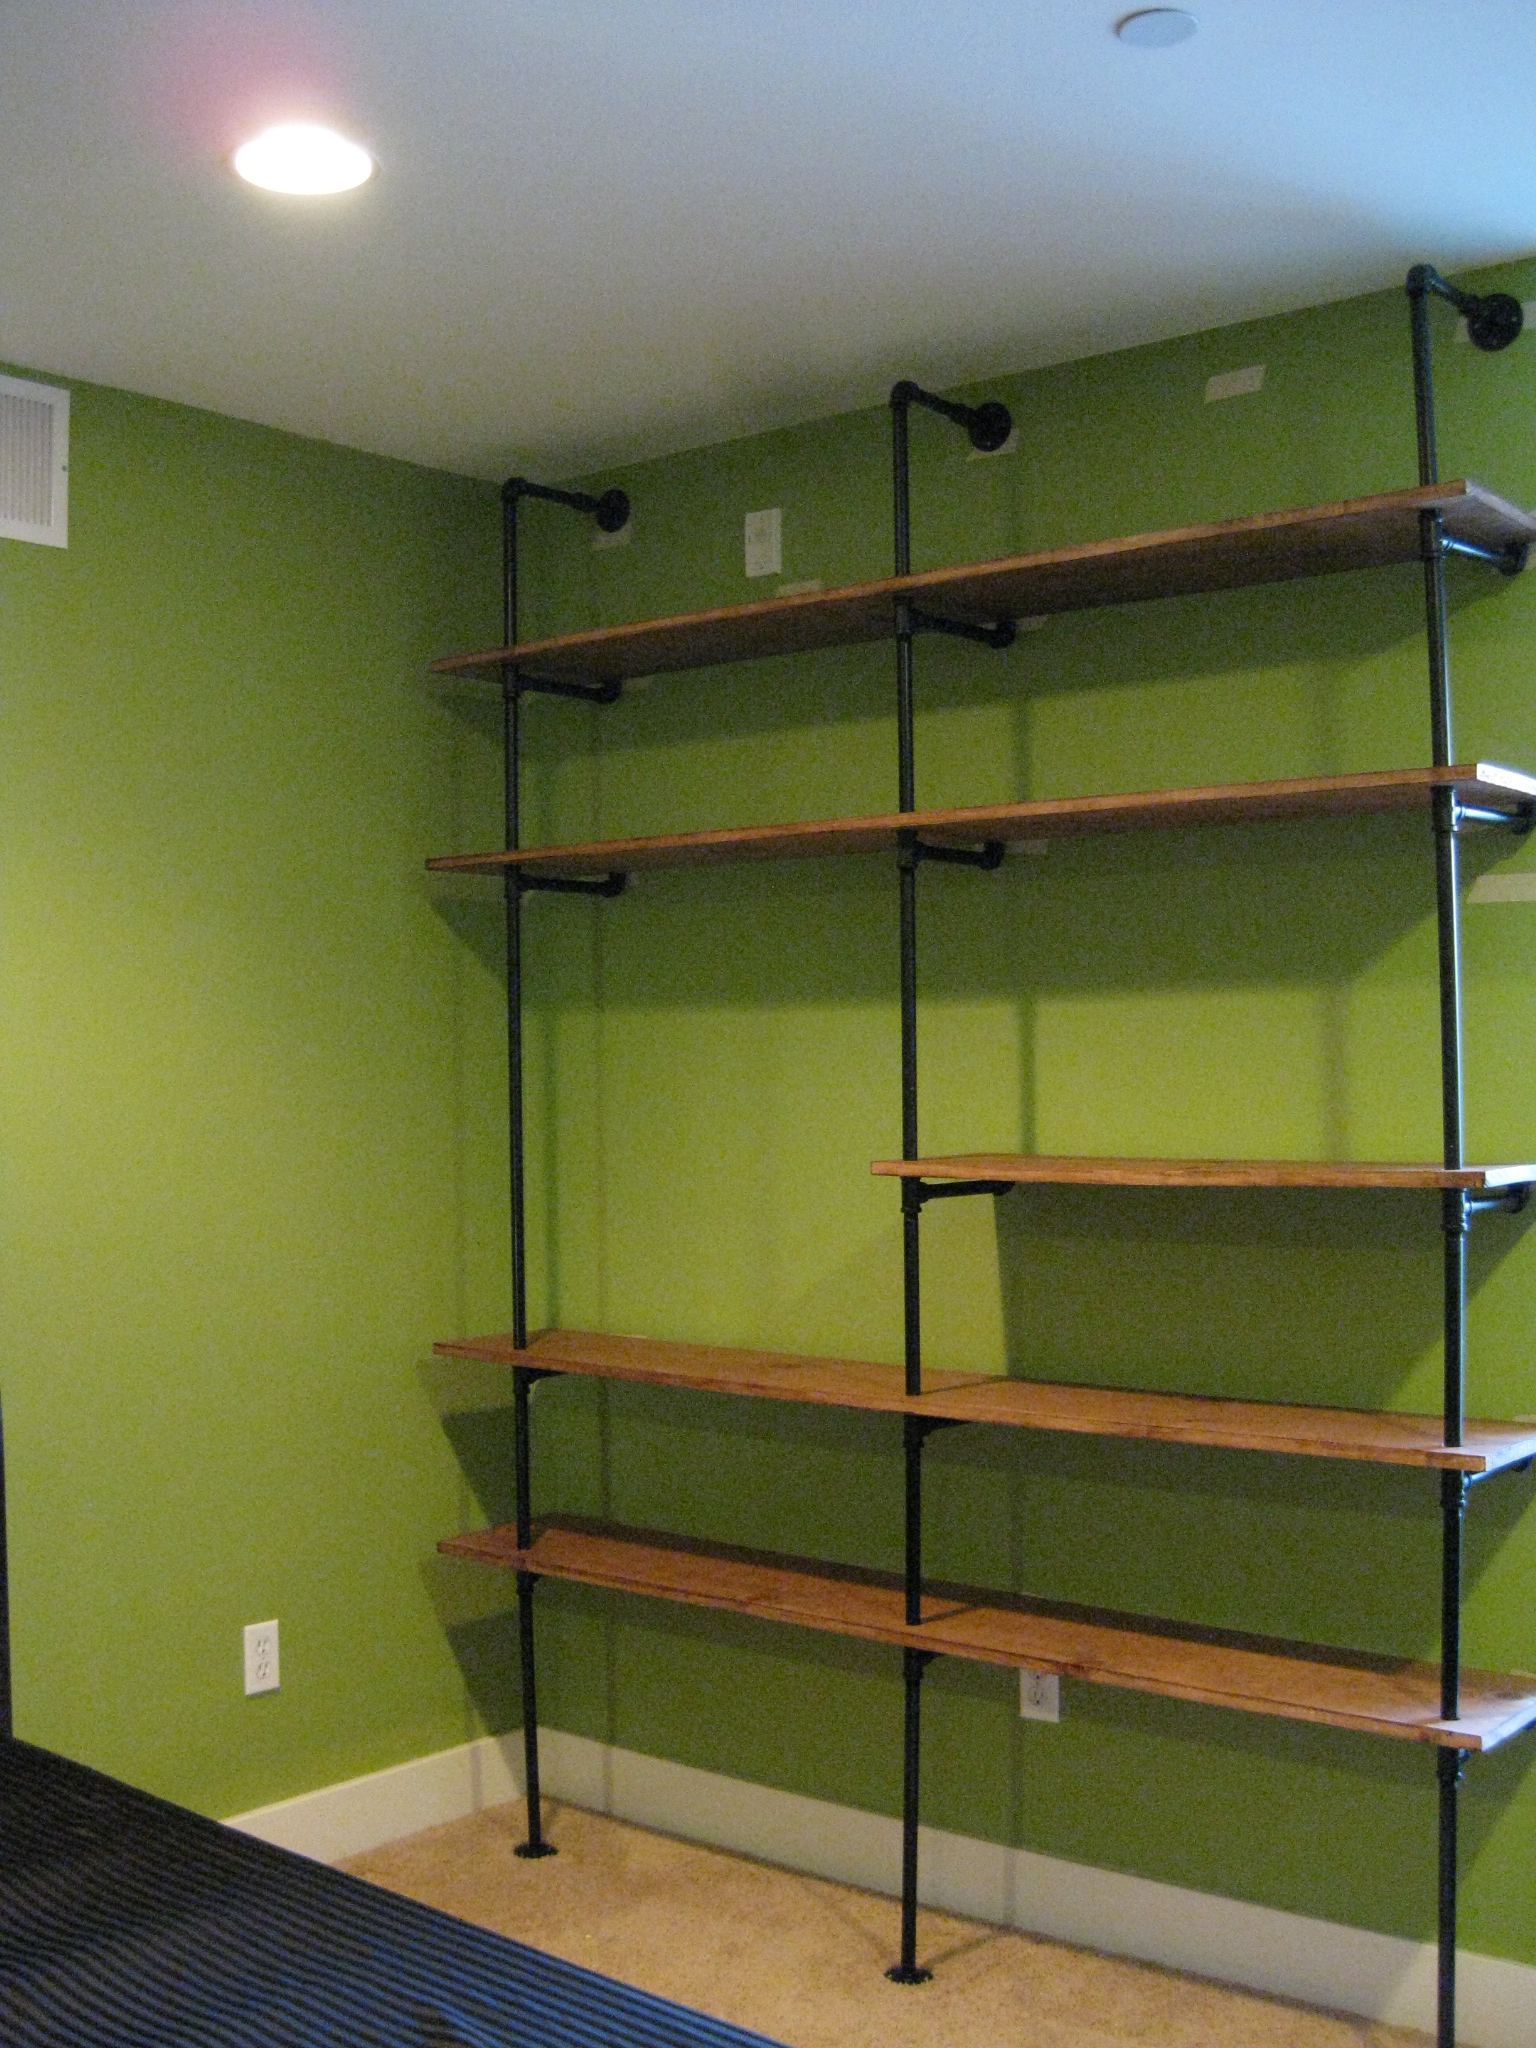 Diy Pipe Shelving The Overly Detailed Tutorial Diy Esq